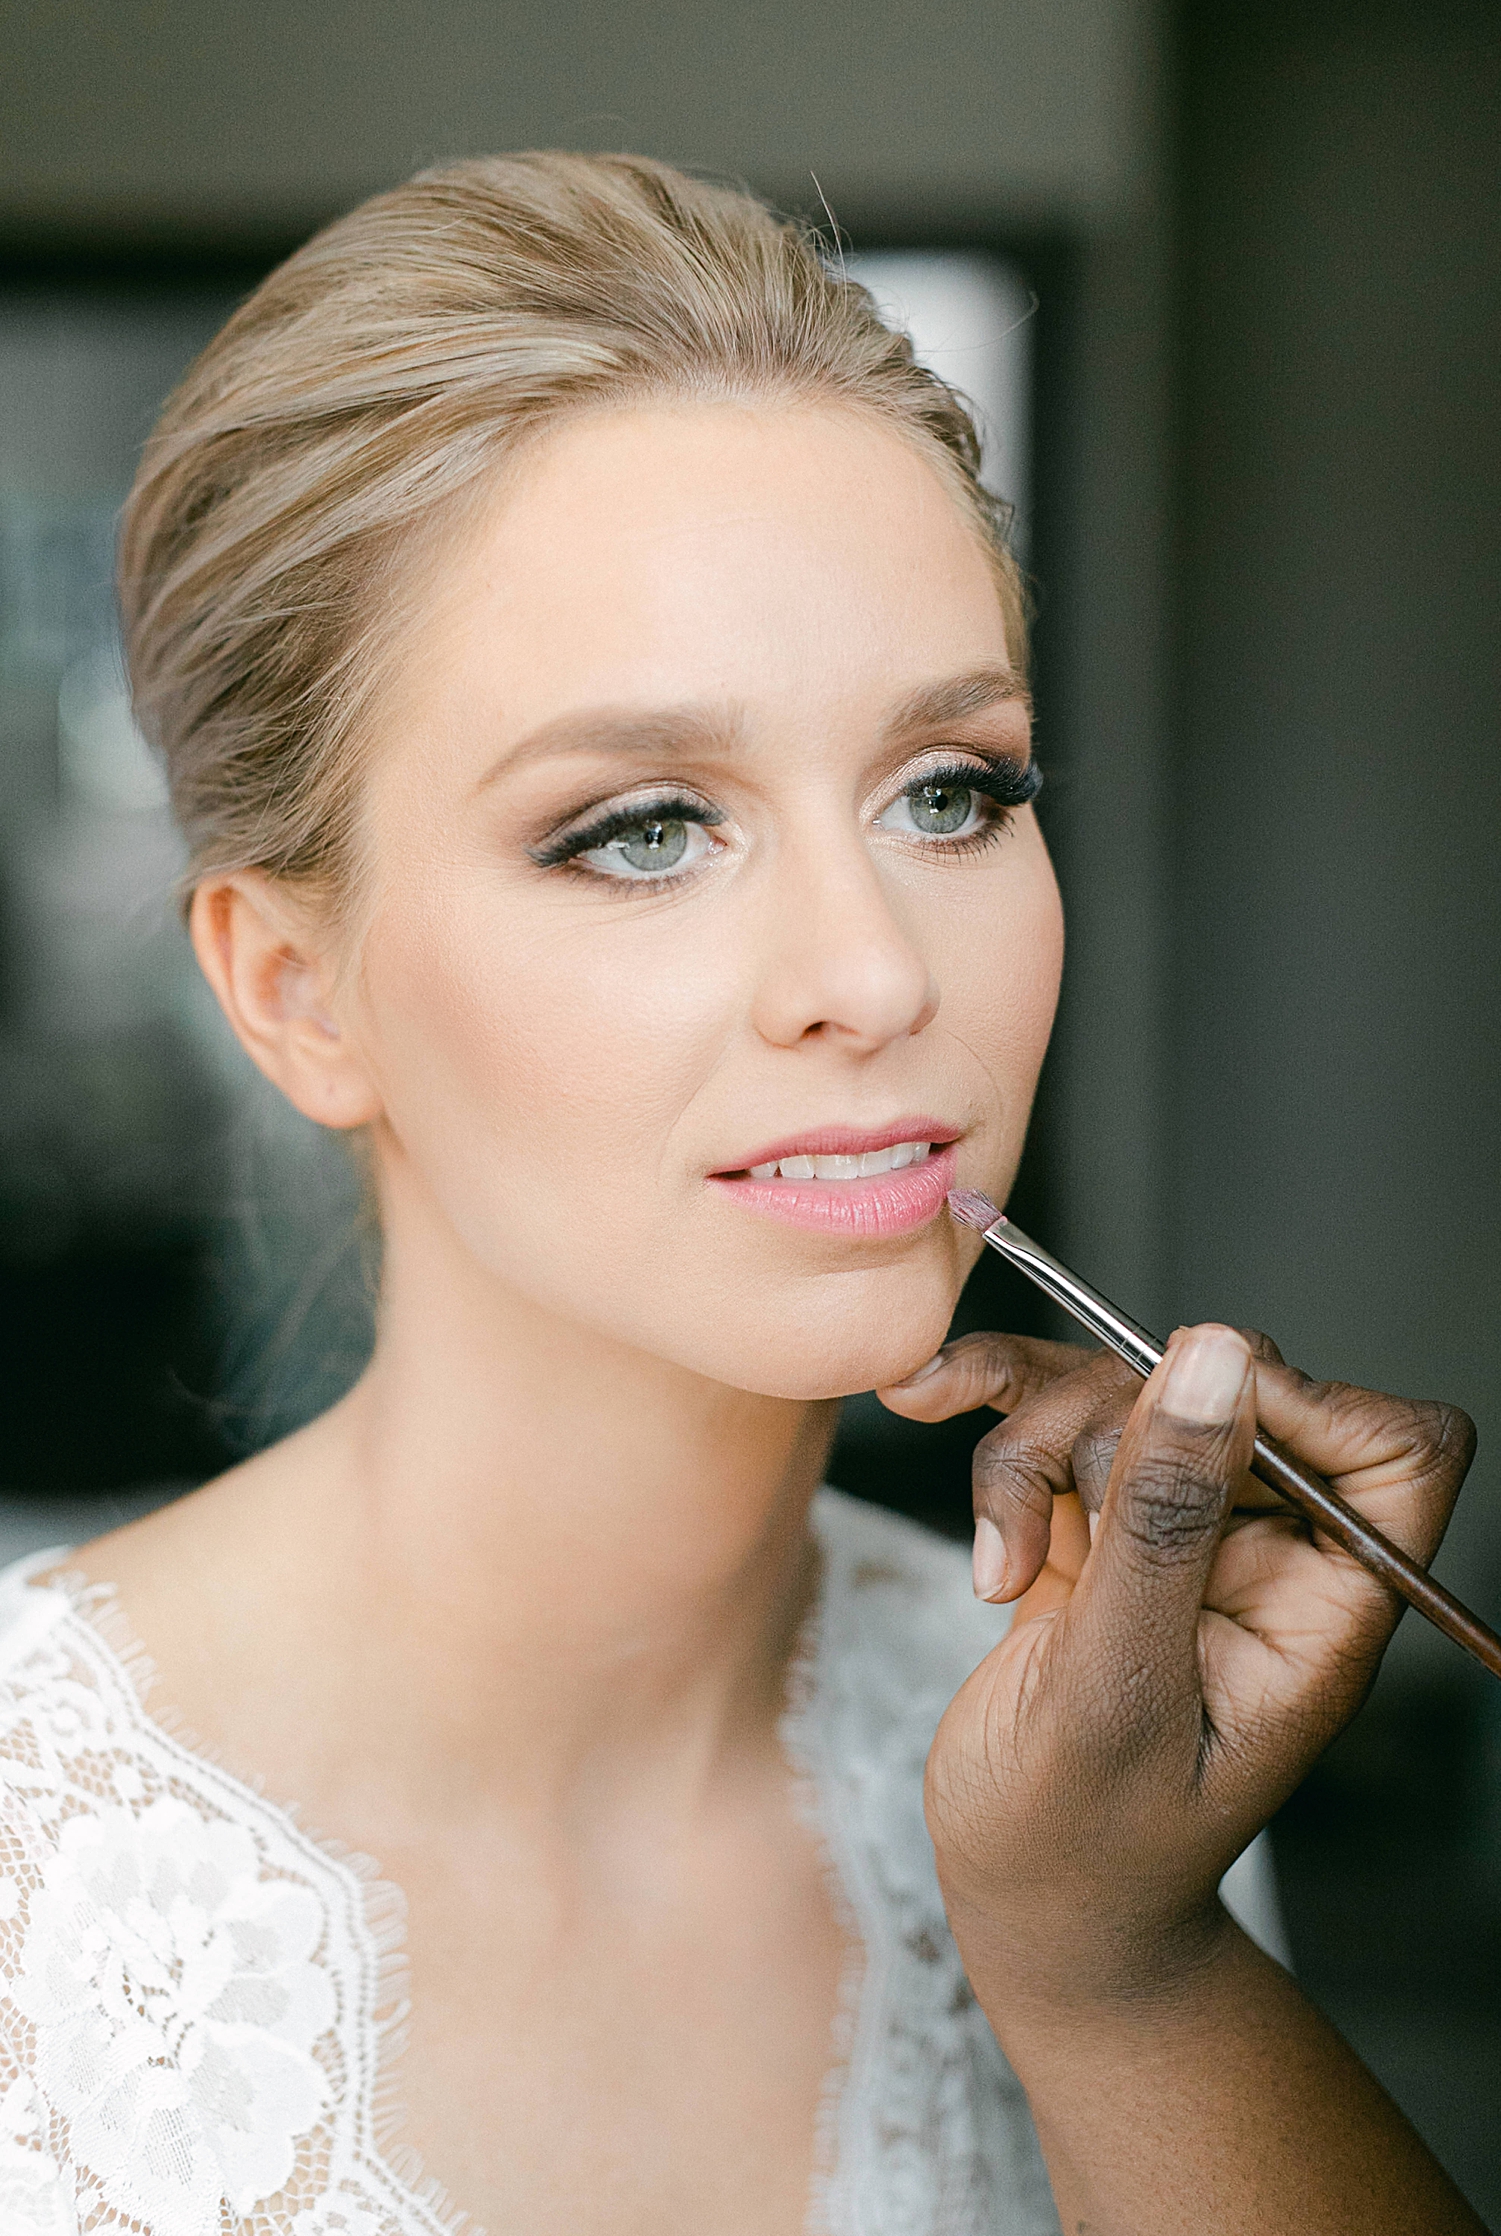 Bride getting lip makeup done on wedding day